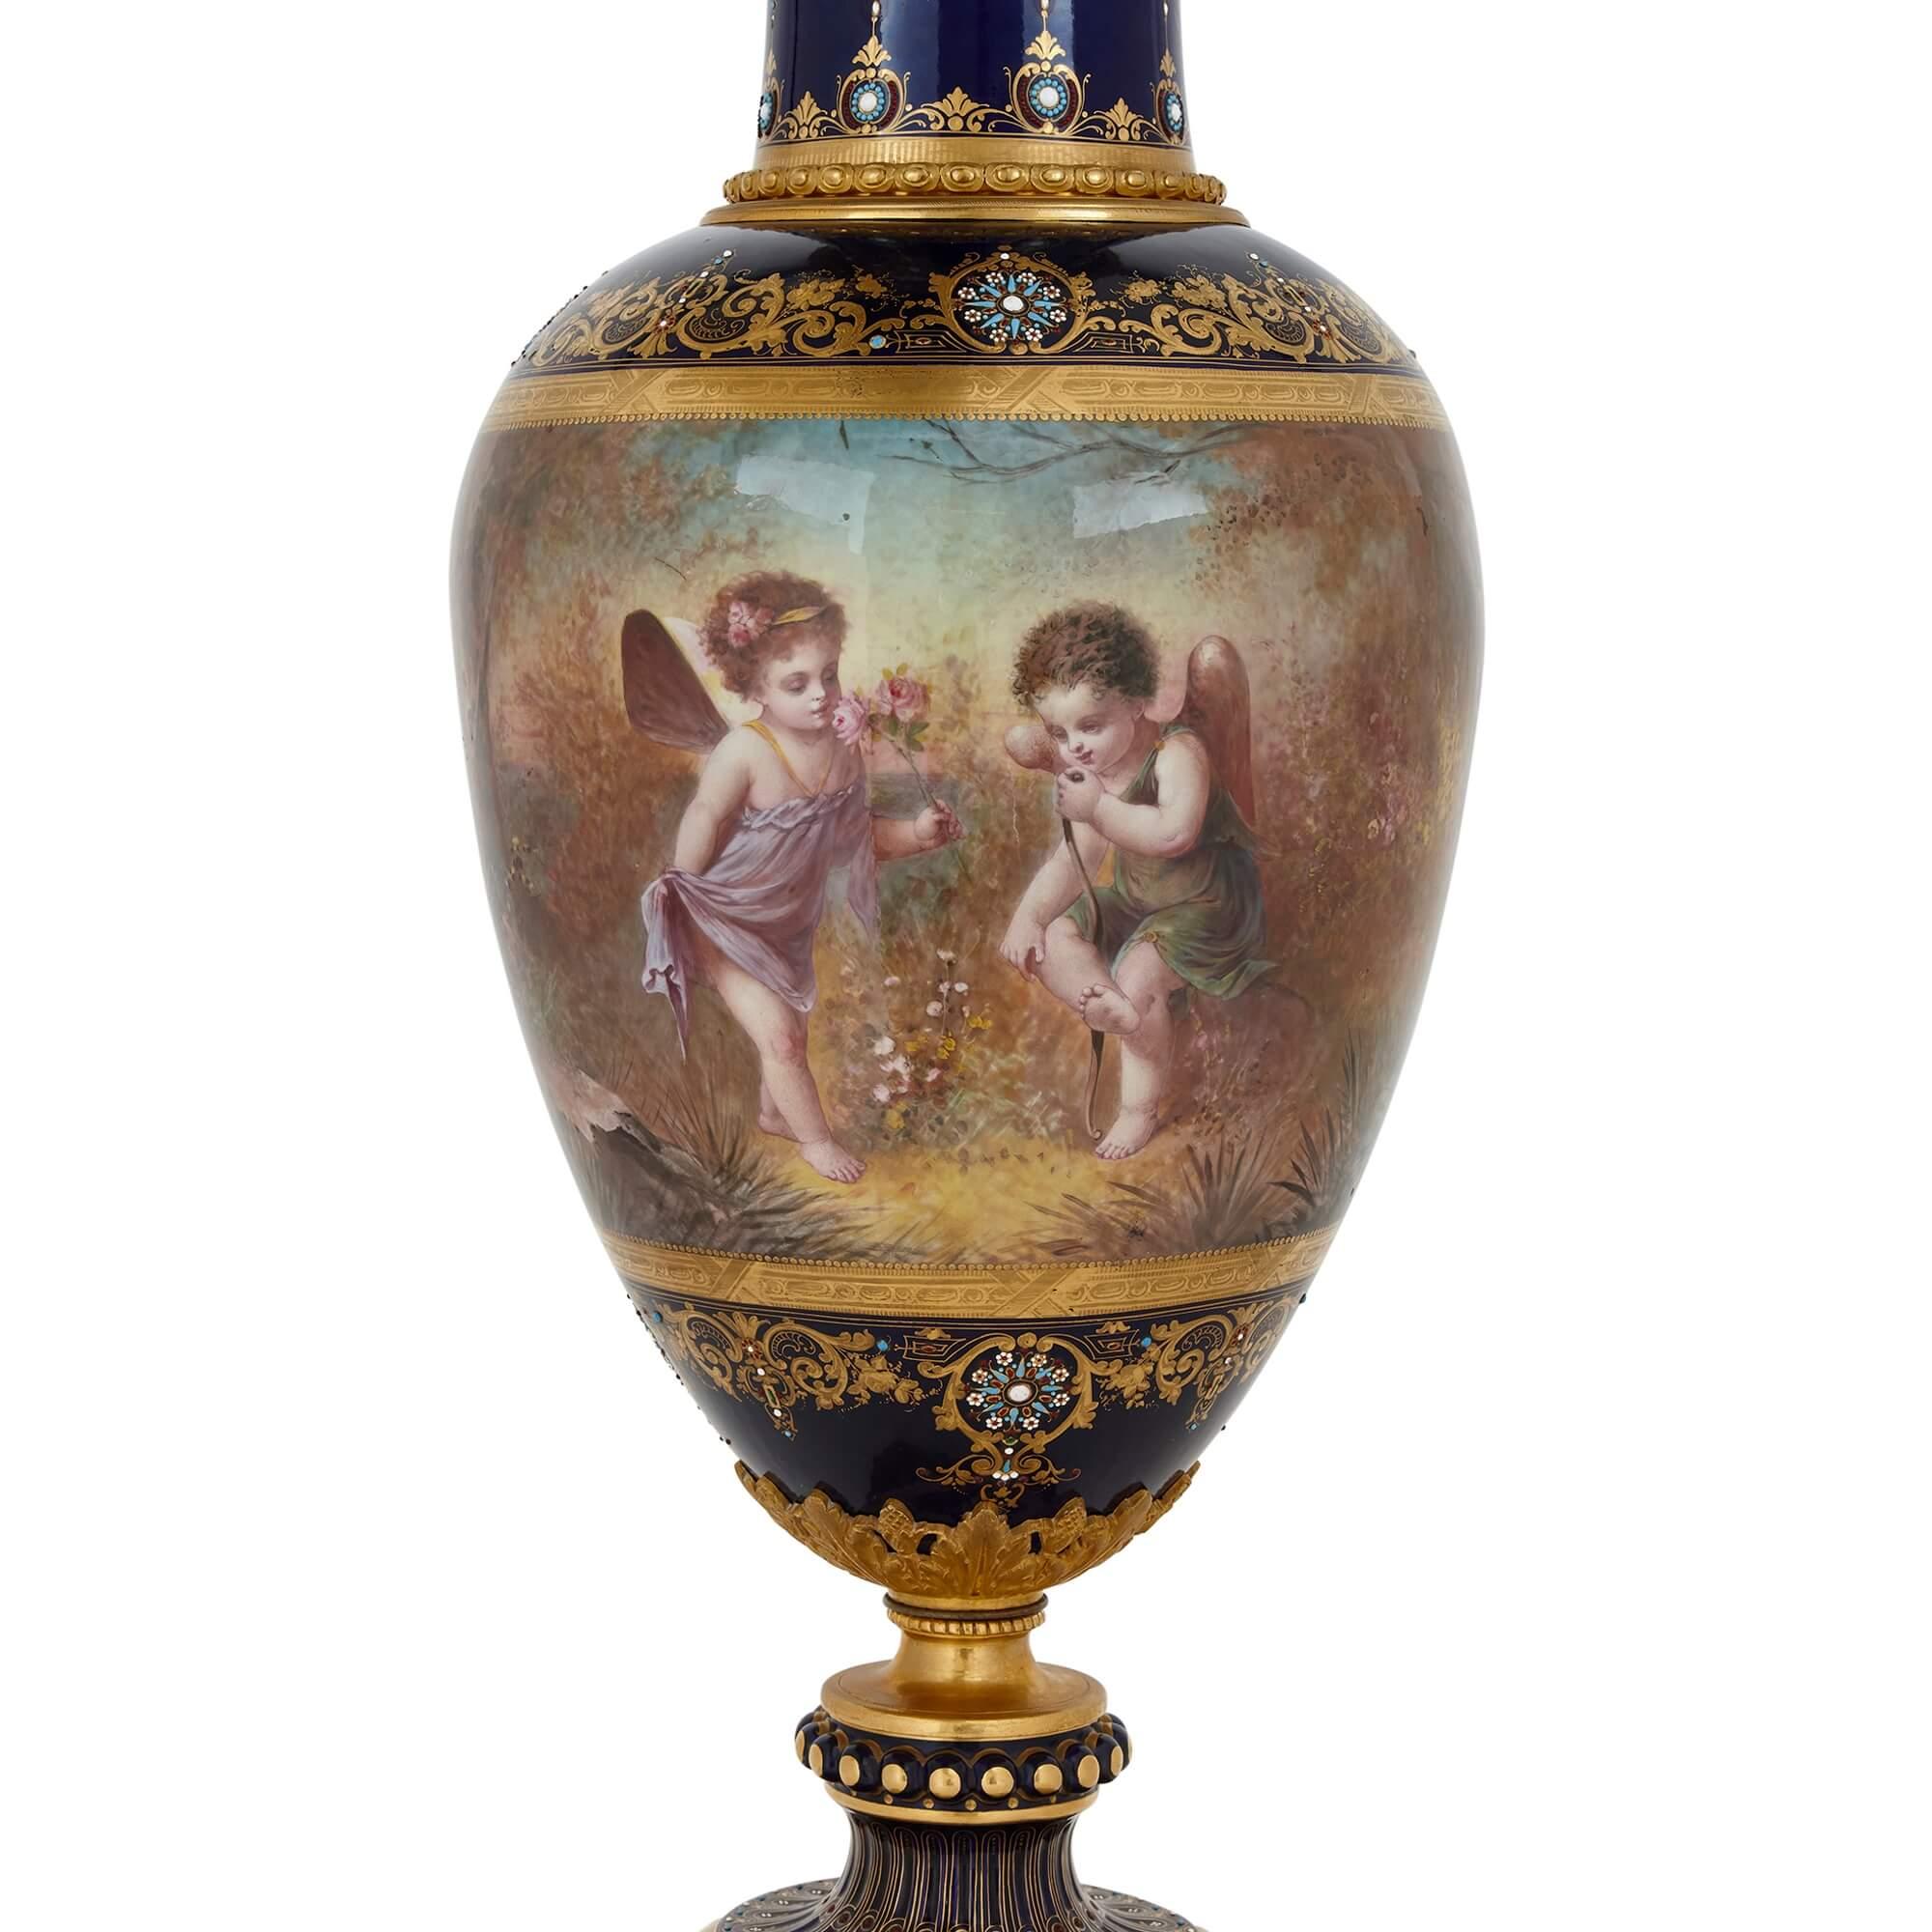 Large Neoclassical style gilt bronze and porcelain vase
French, 19th Century
Measures: height 87 cm, diameter 27 cm

This grand porcelain vase is crafted in the style of Sèvres. The ovoid bodied vase, which features a cylindrical neck above and